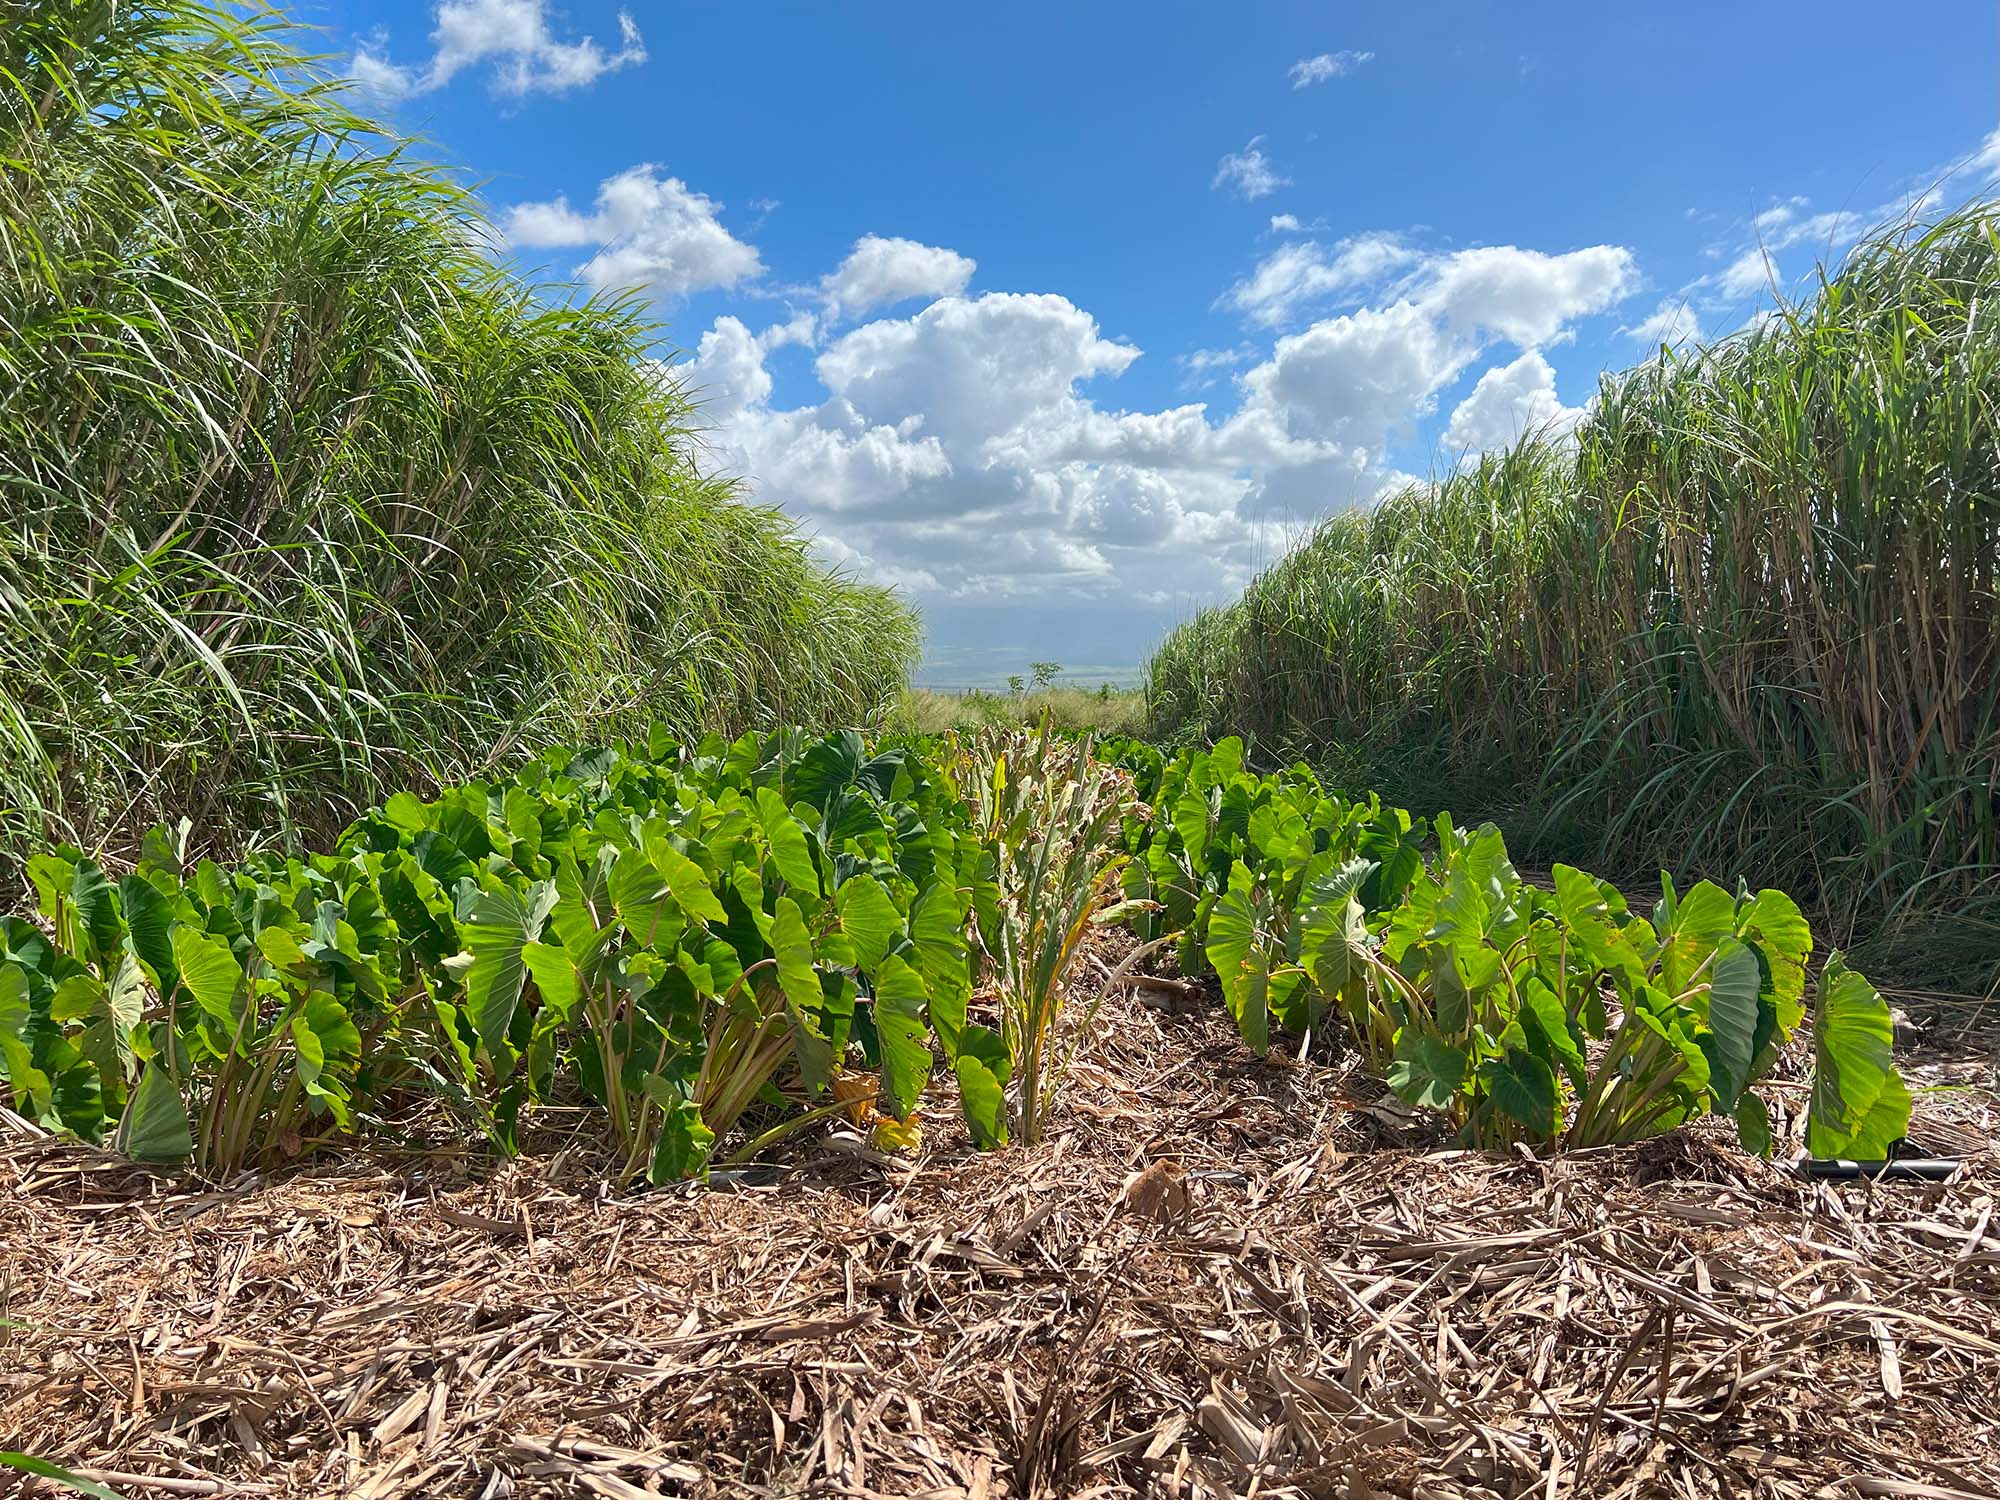 Winsome plants the next crop directly into the mulch as soon as possible so that weeds don’t get established. This method ensures that the next crop can receive the benefits from the cover crop which adds nitrogen back to the system.